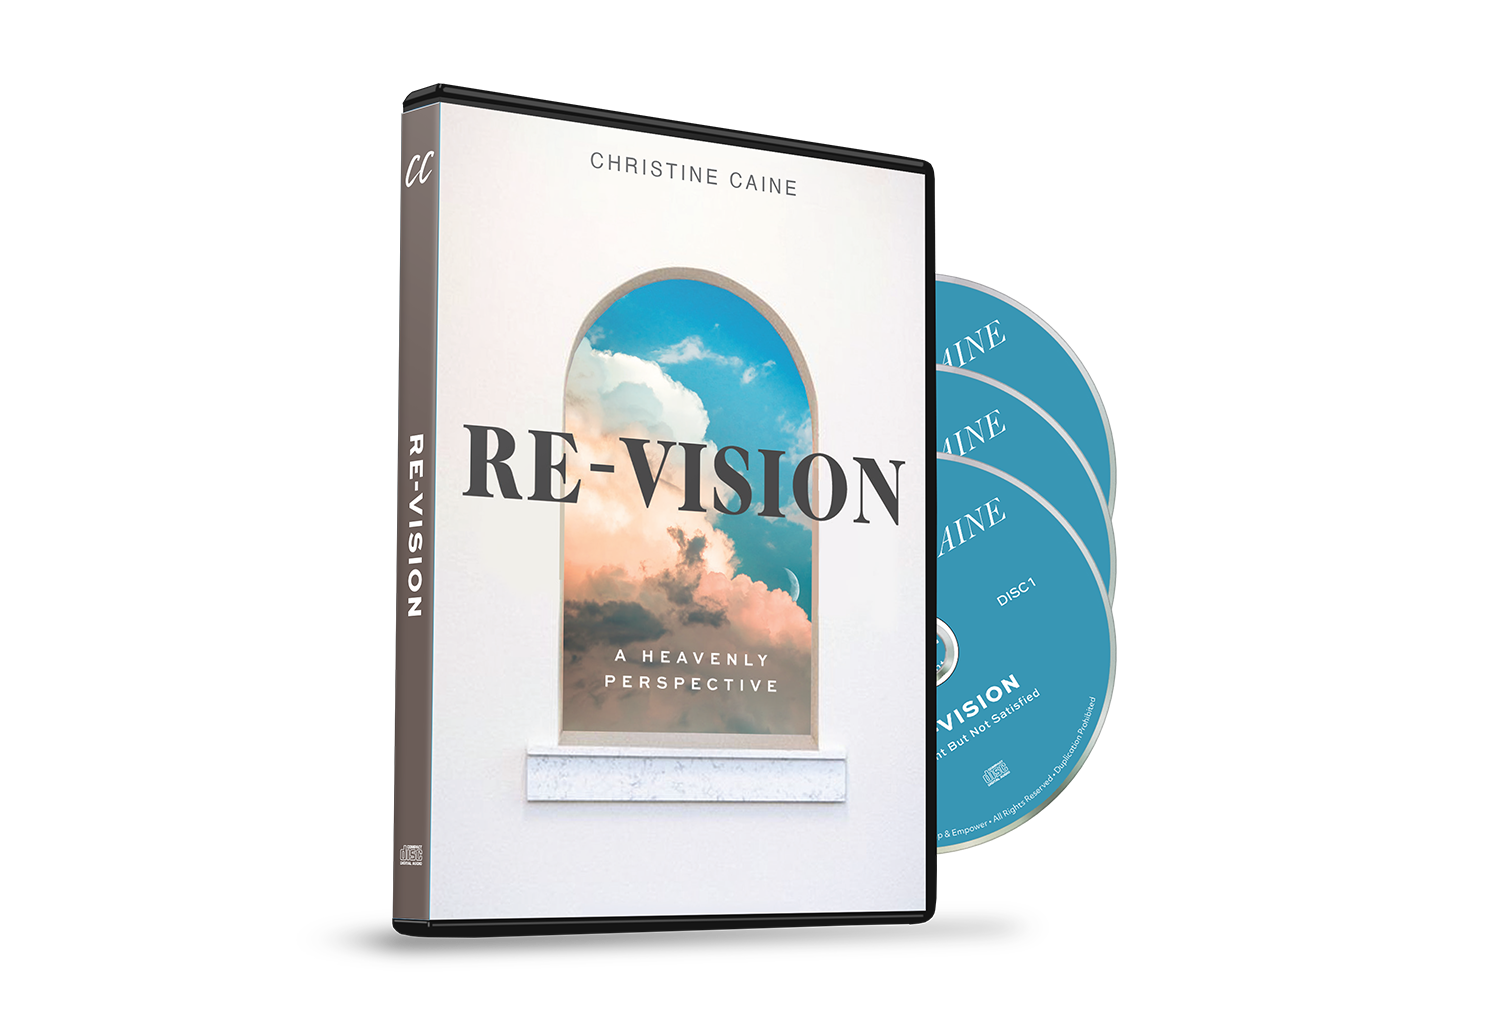 Re-Vision by Christine Caine on TBN